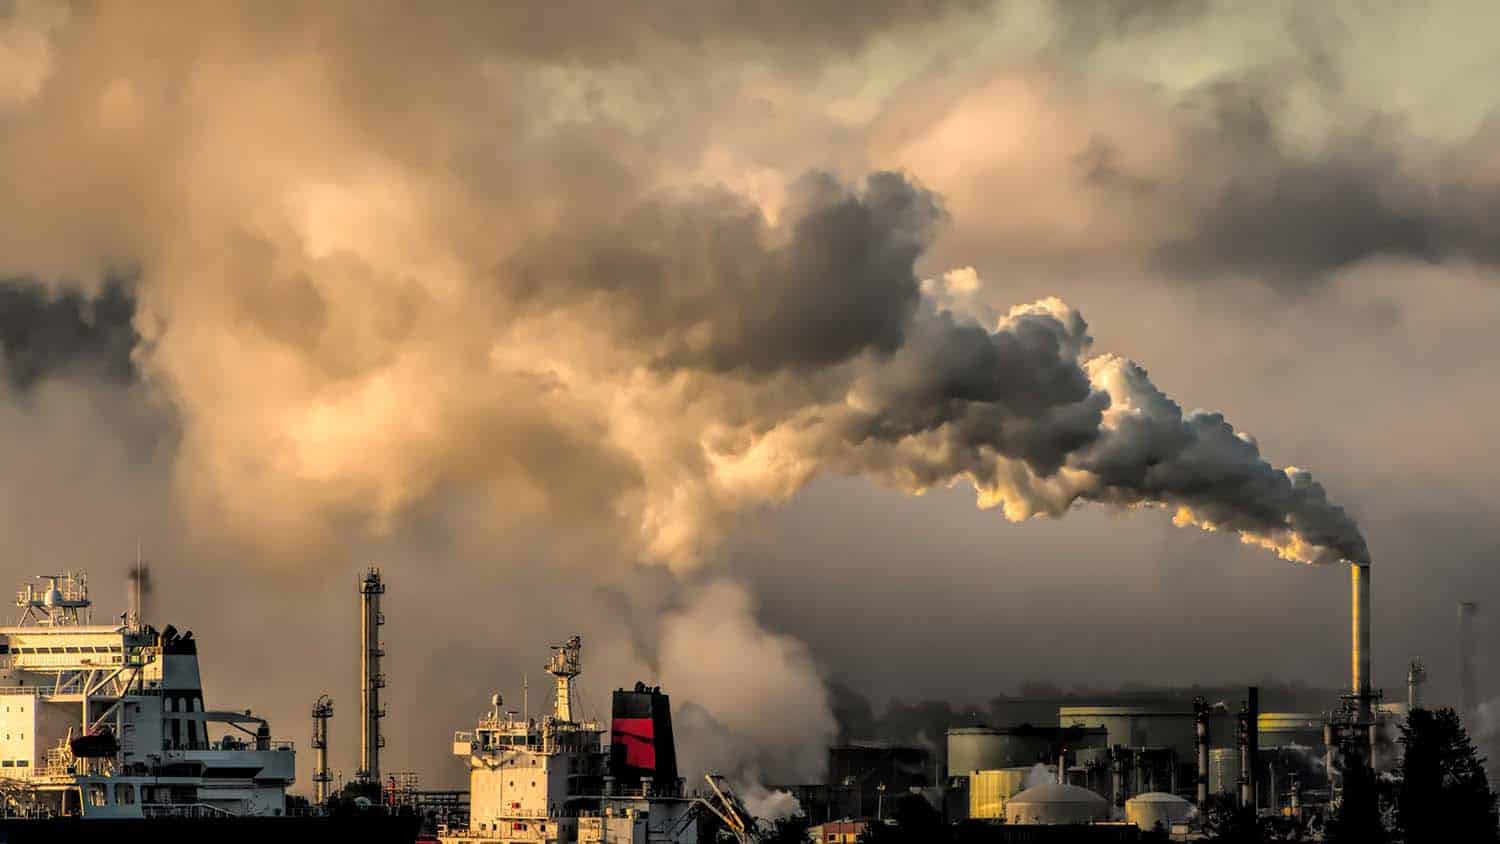 photo of an industrial landscape with large smokestacks billowing white clouds